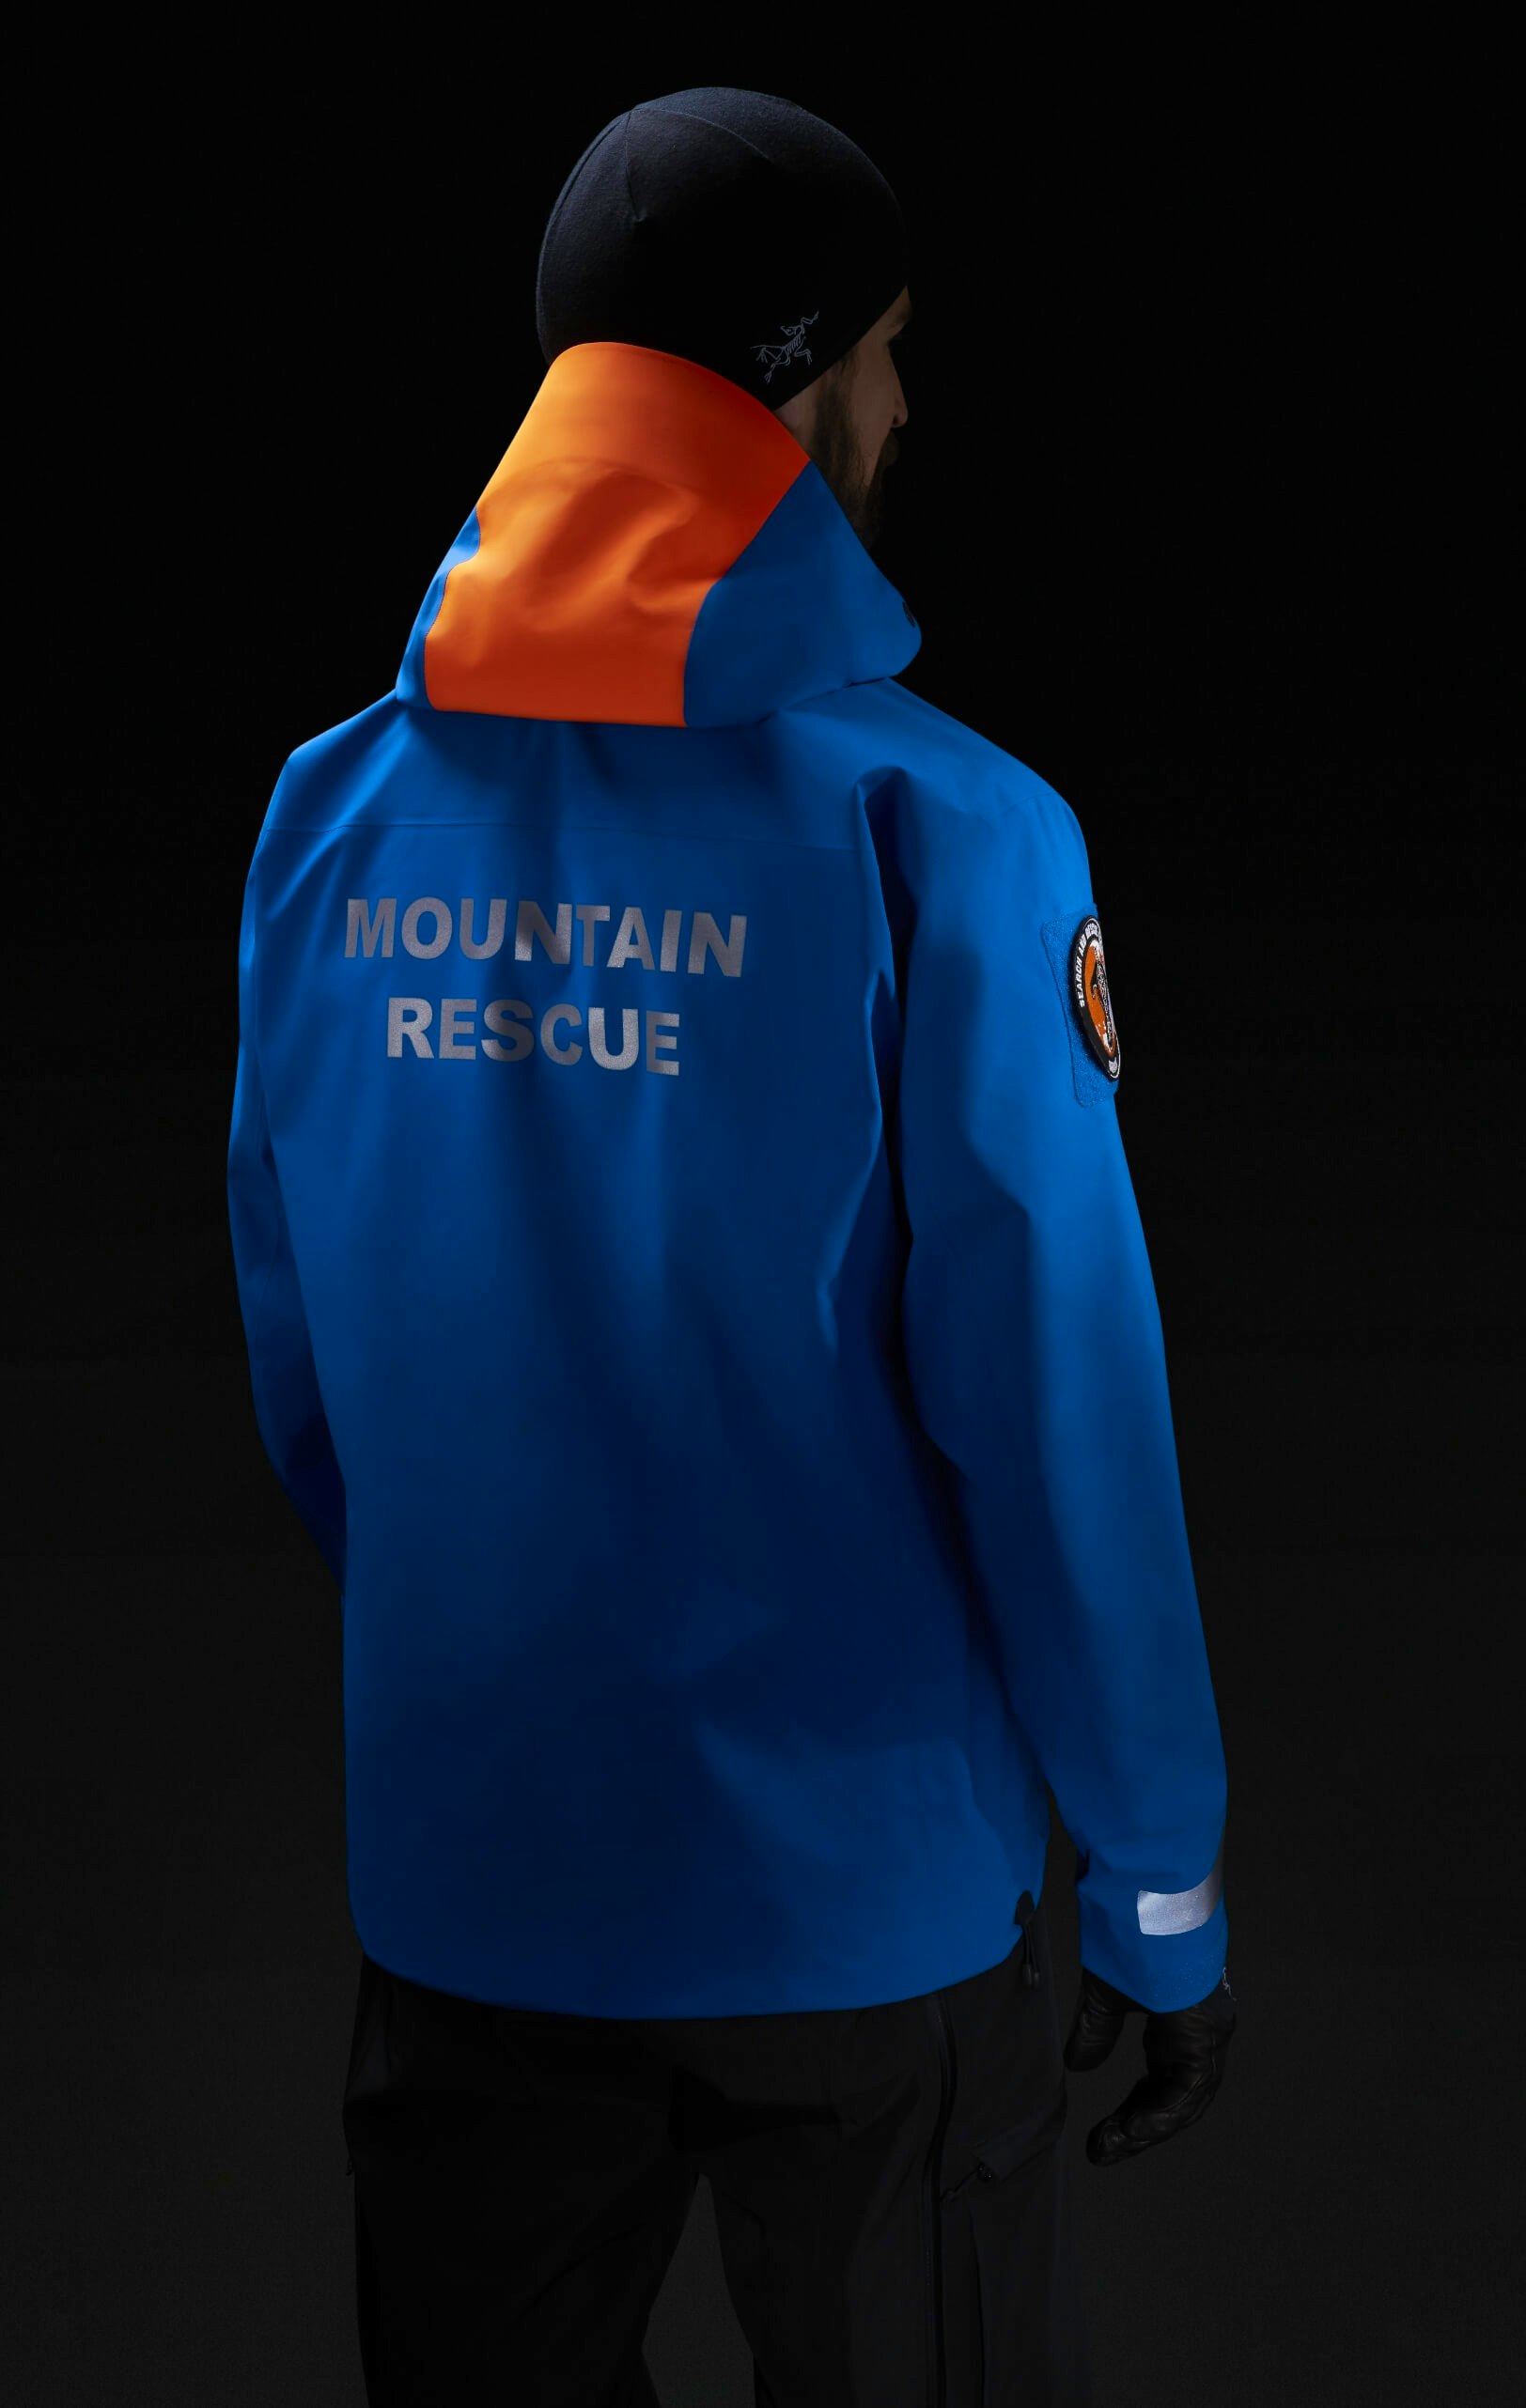 Mountain shirts designed with a passion for the outdoors and